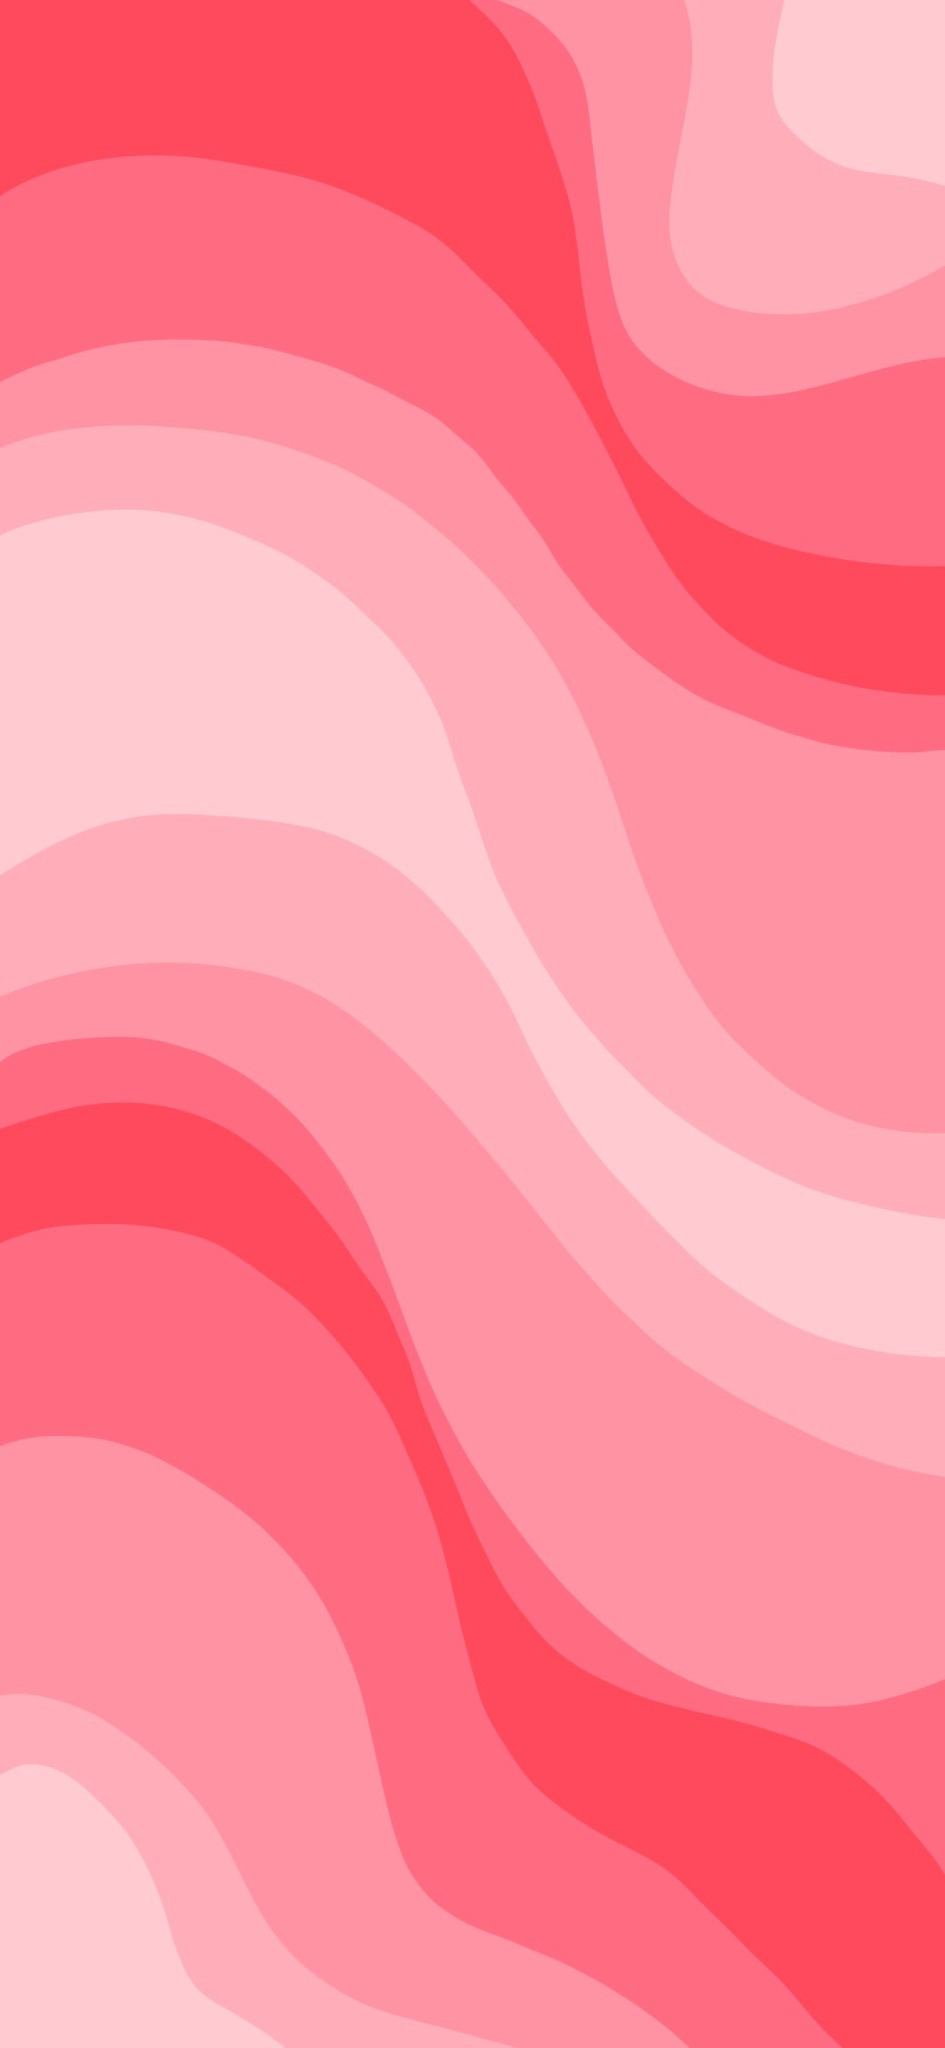 40 Cute Pink Wallpapers For iPhone